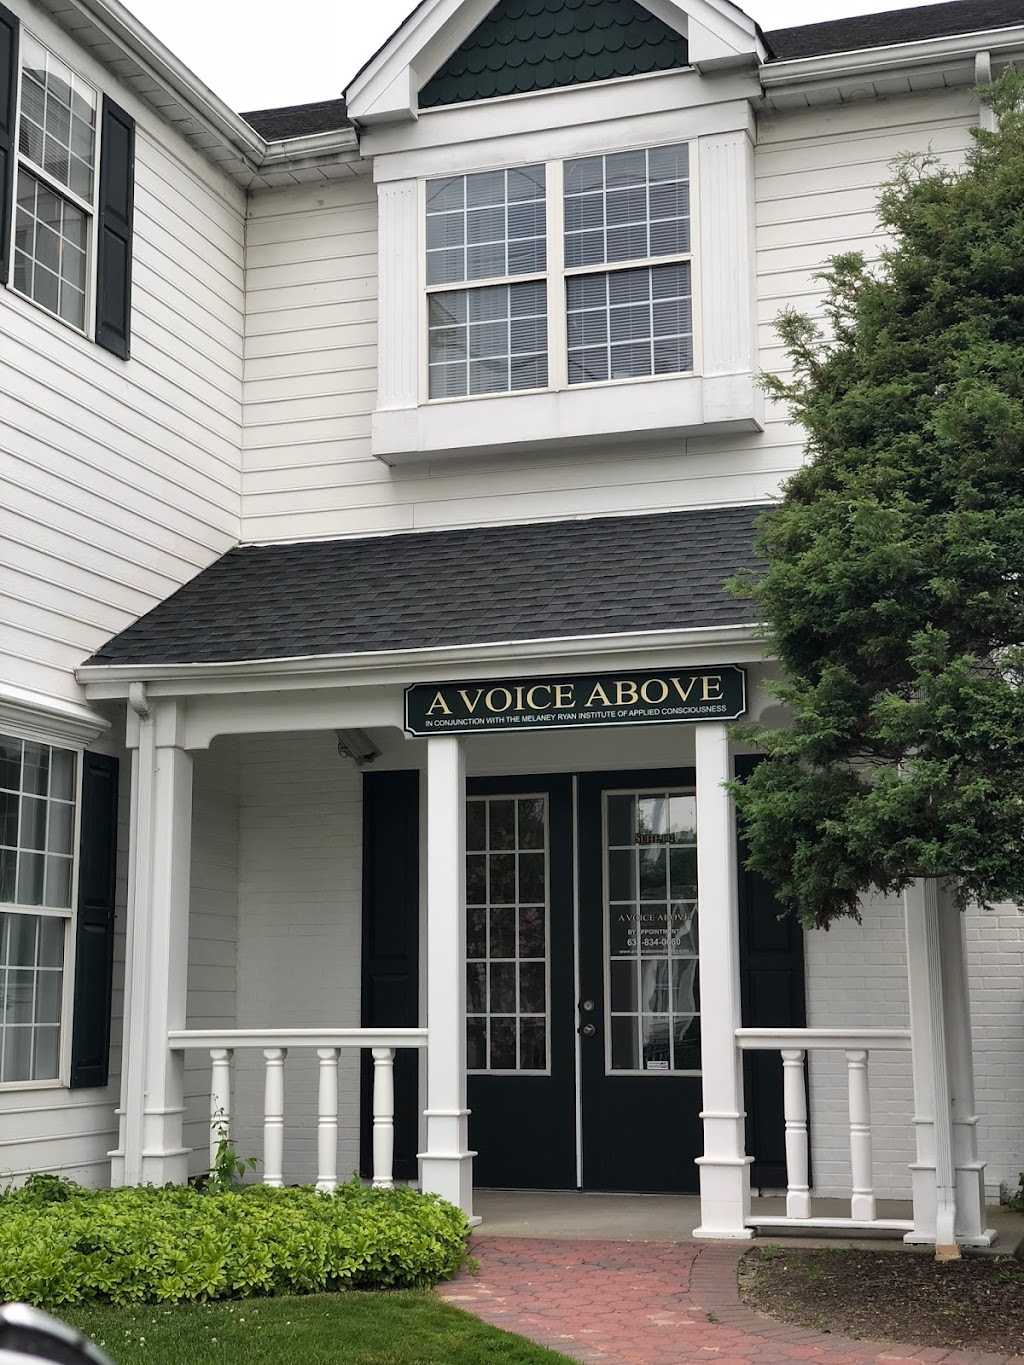 A Voice Above | 112 S Country Rd, Bellport, NY 11713 | Phone: (631) 834-0660